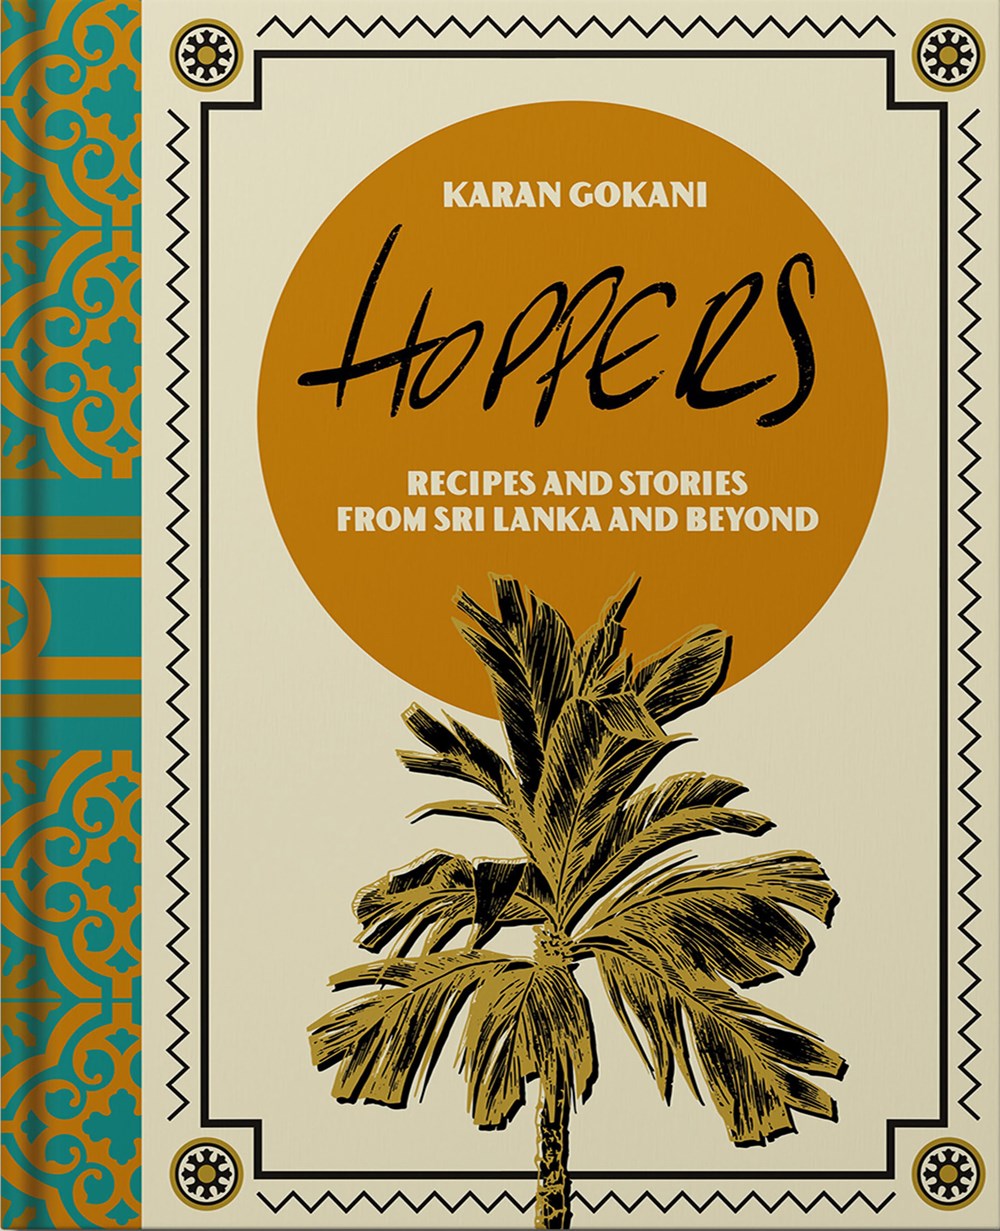 Hoppers: Recipes, Memories and Inspiration from Sri Lankan Homes, Streets and Beyond (Karan Gokani) *Signed*